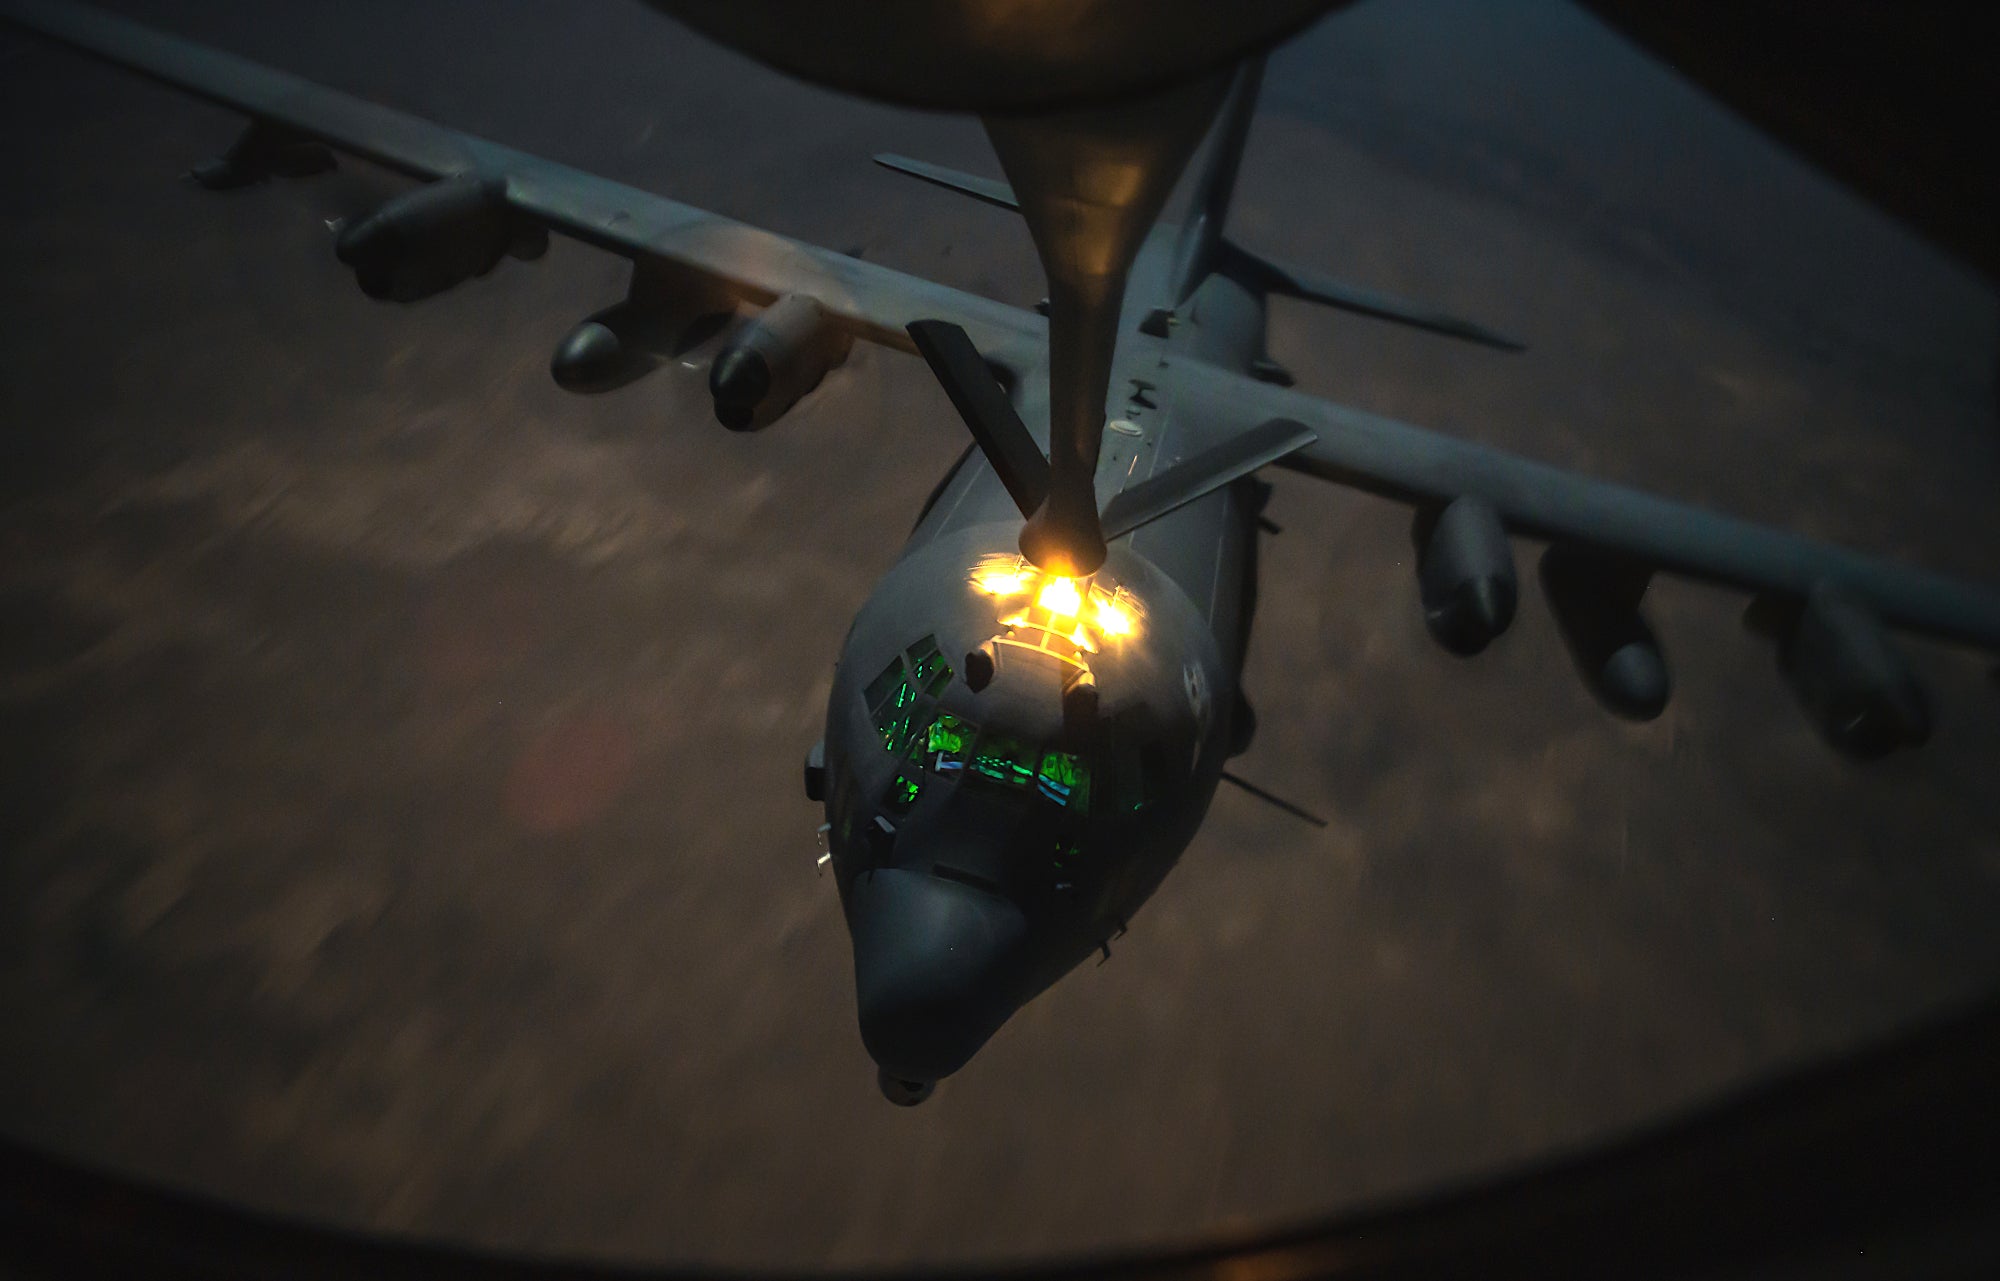 A U.S. Air Force AC-130J Ghostrider receives fuel from a U.S. Air Force KC-135 Stratotanker, assigned to the 340th Expeditionary Aircraft Refueling Squadron, during a night-time air refueling mission over Southwest Asia, Dec. 25, 2020. The KC-135 Stratotanker delivers U.S. Air Forces Central a global aerial refueling capability to support joint and coalition aircraft throughout the U.S. Central Command area of responsibility. (U.S. Air Force photo by Staff Sgt. Trevor T. McBride)